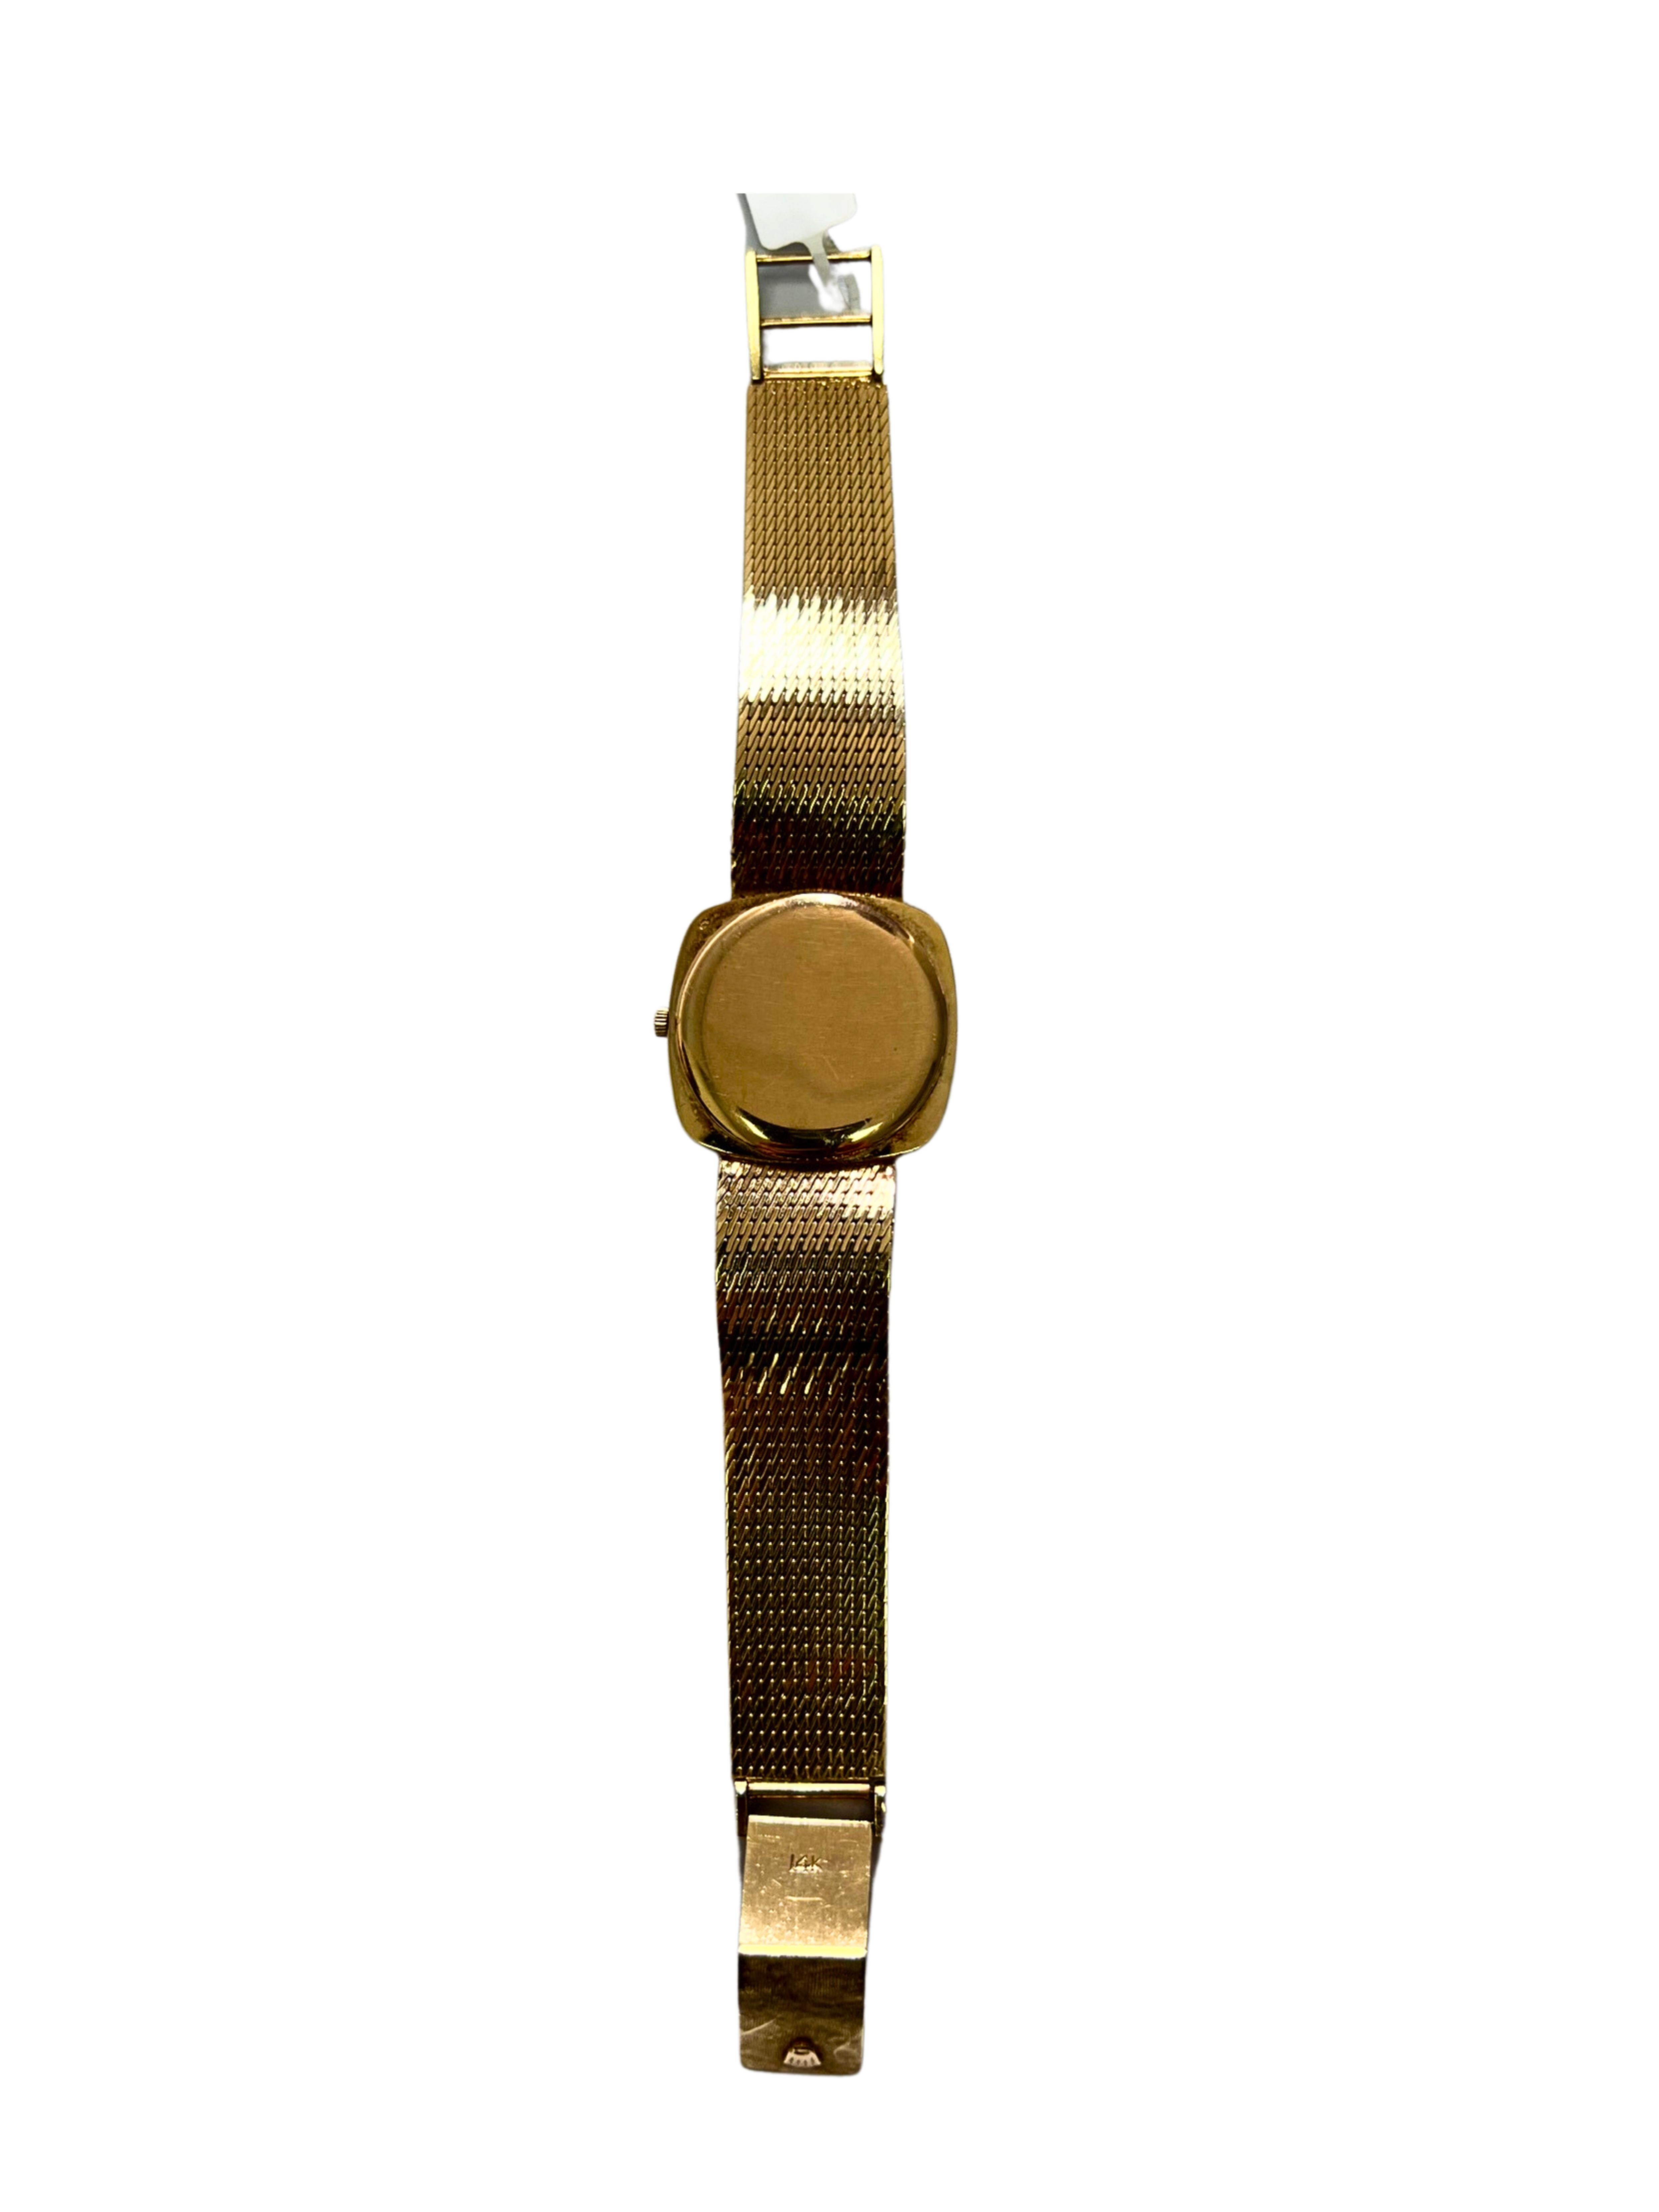 Rolex - Cellini Watch - 57 Grams - 14k Gold - 7 inches length, 1970s origin, Cushion Shape Dial

The Rolex Cellini collection is truly refinement at its best. Due to its elegance and sheer modernity, the Rolex Cellini should be touted for its